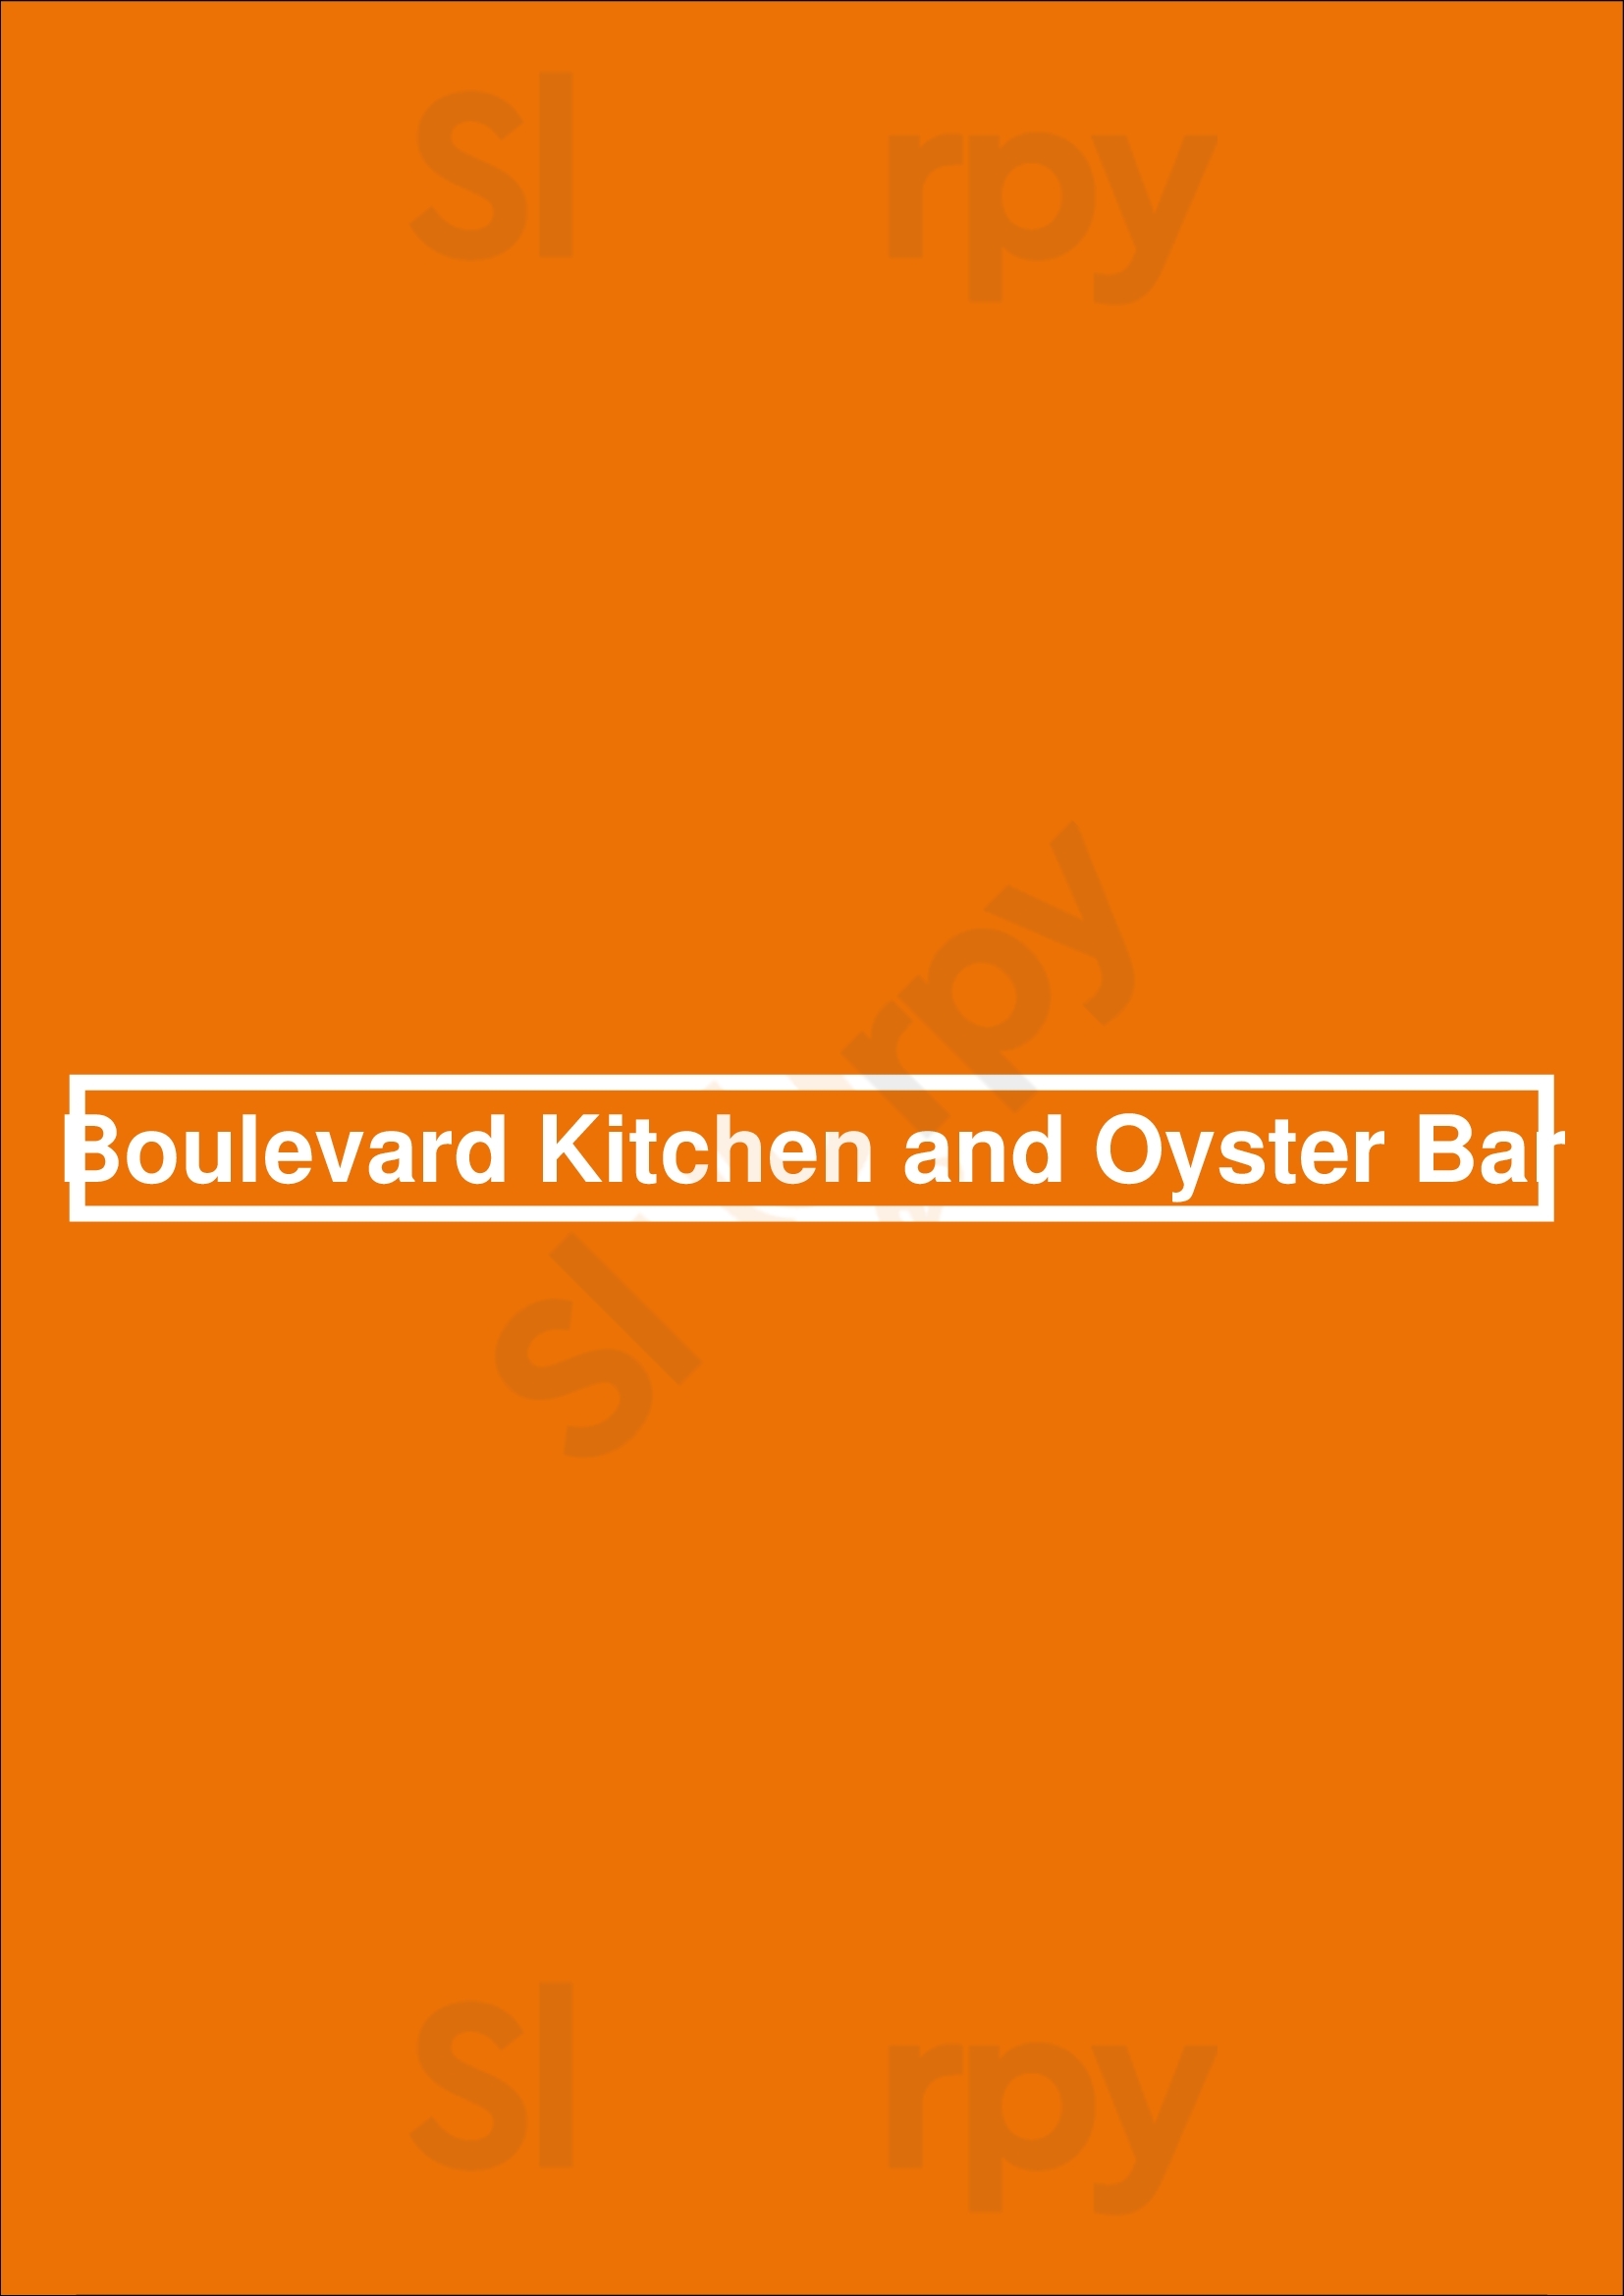 Boulevard Kitchen And Oyster Bar Vancouver Menu - 1